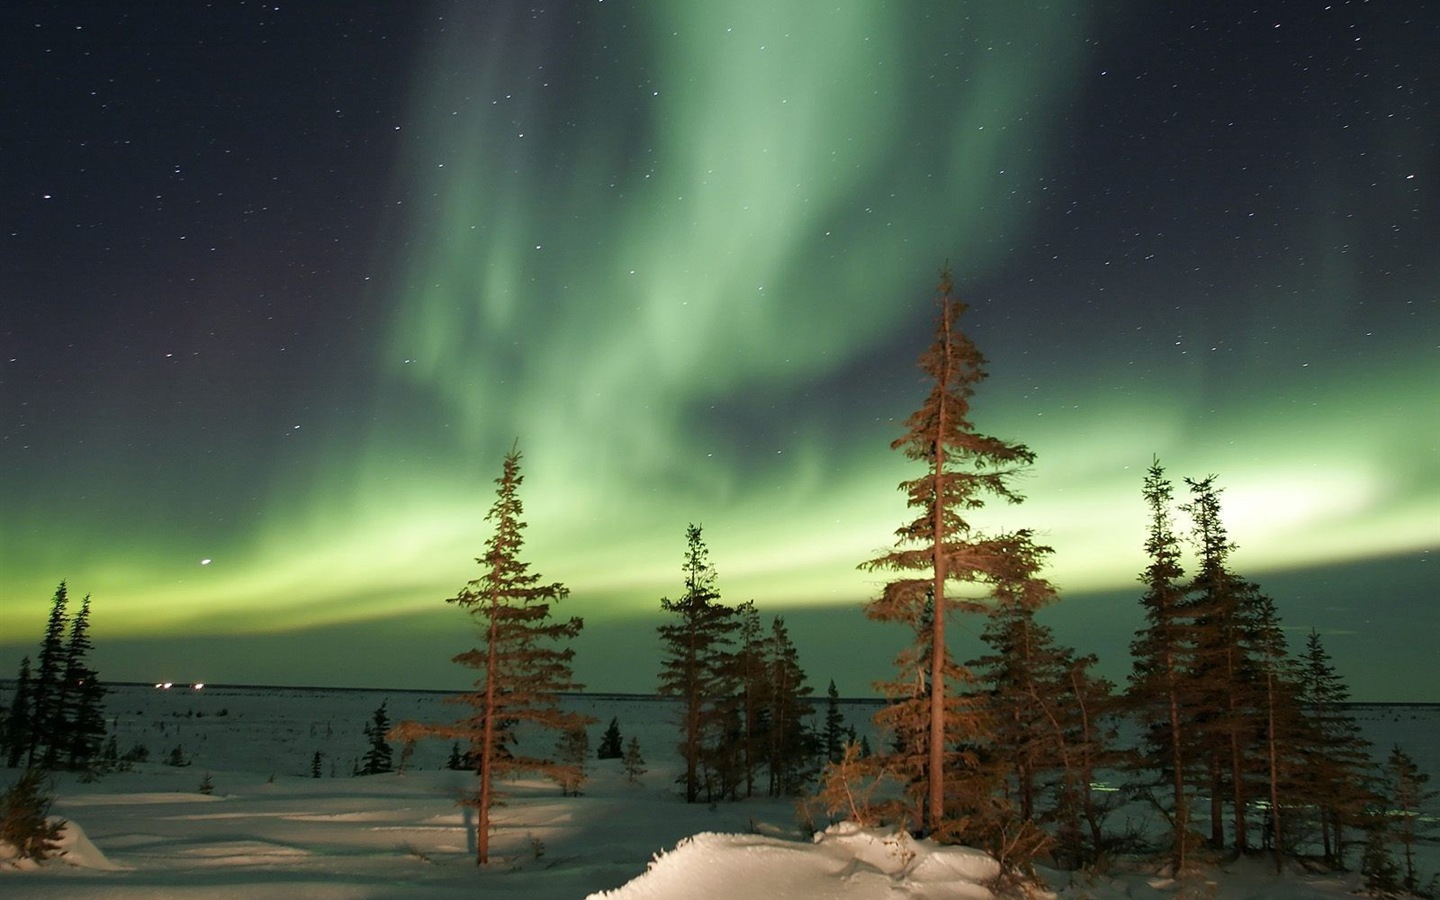 Natural wonders of the Northern Lights HD Wallpaper (2) #3 - 1440x900